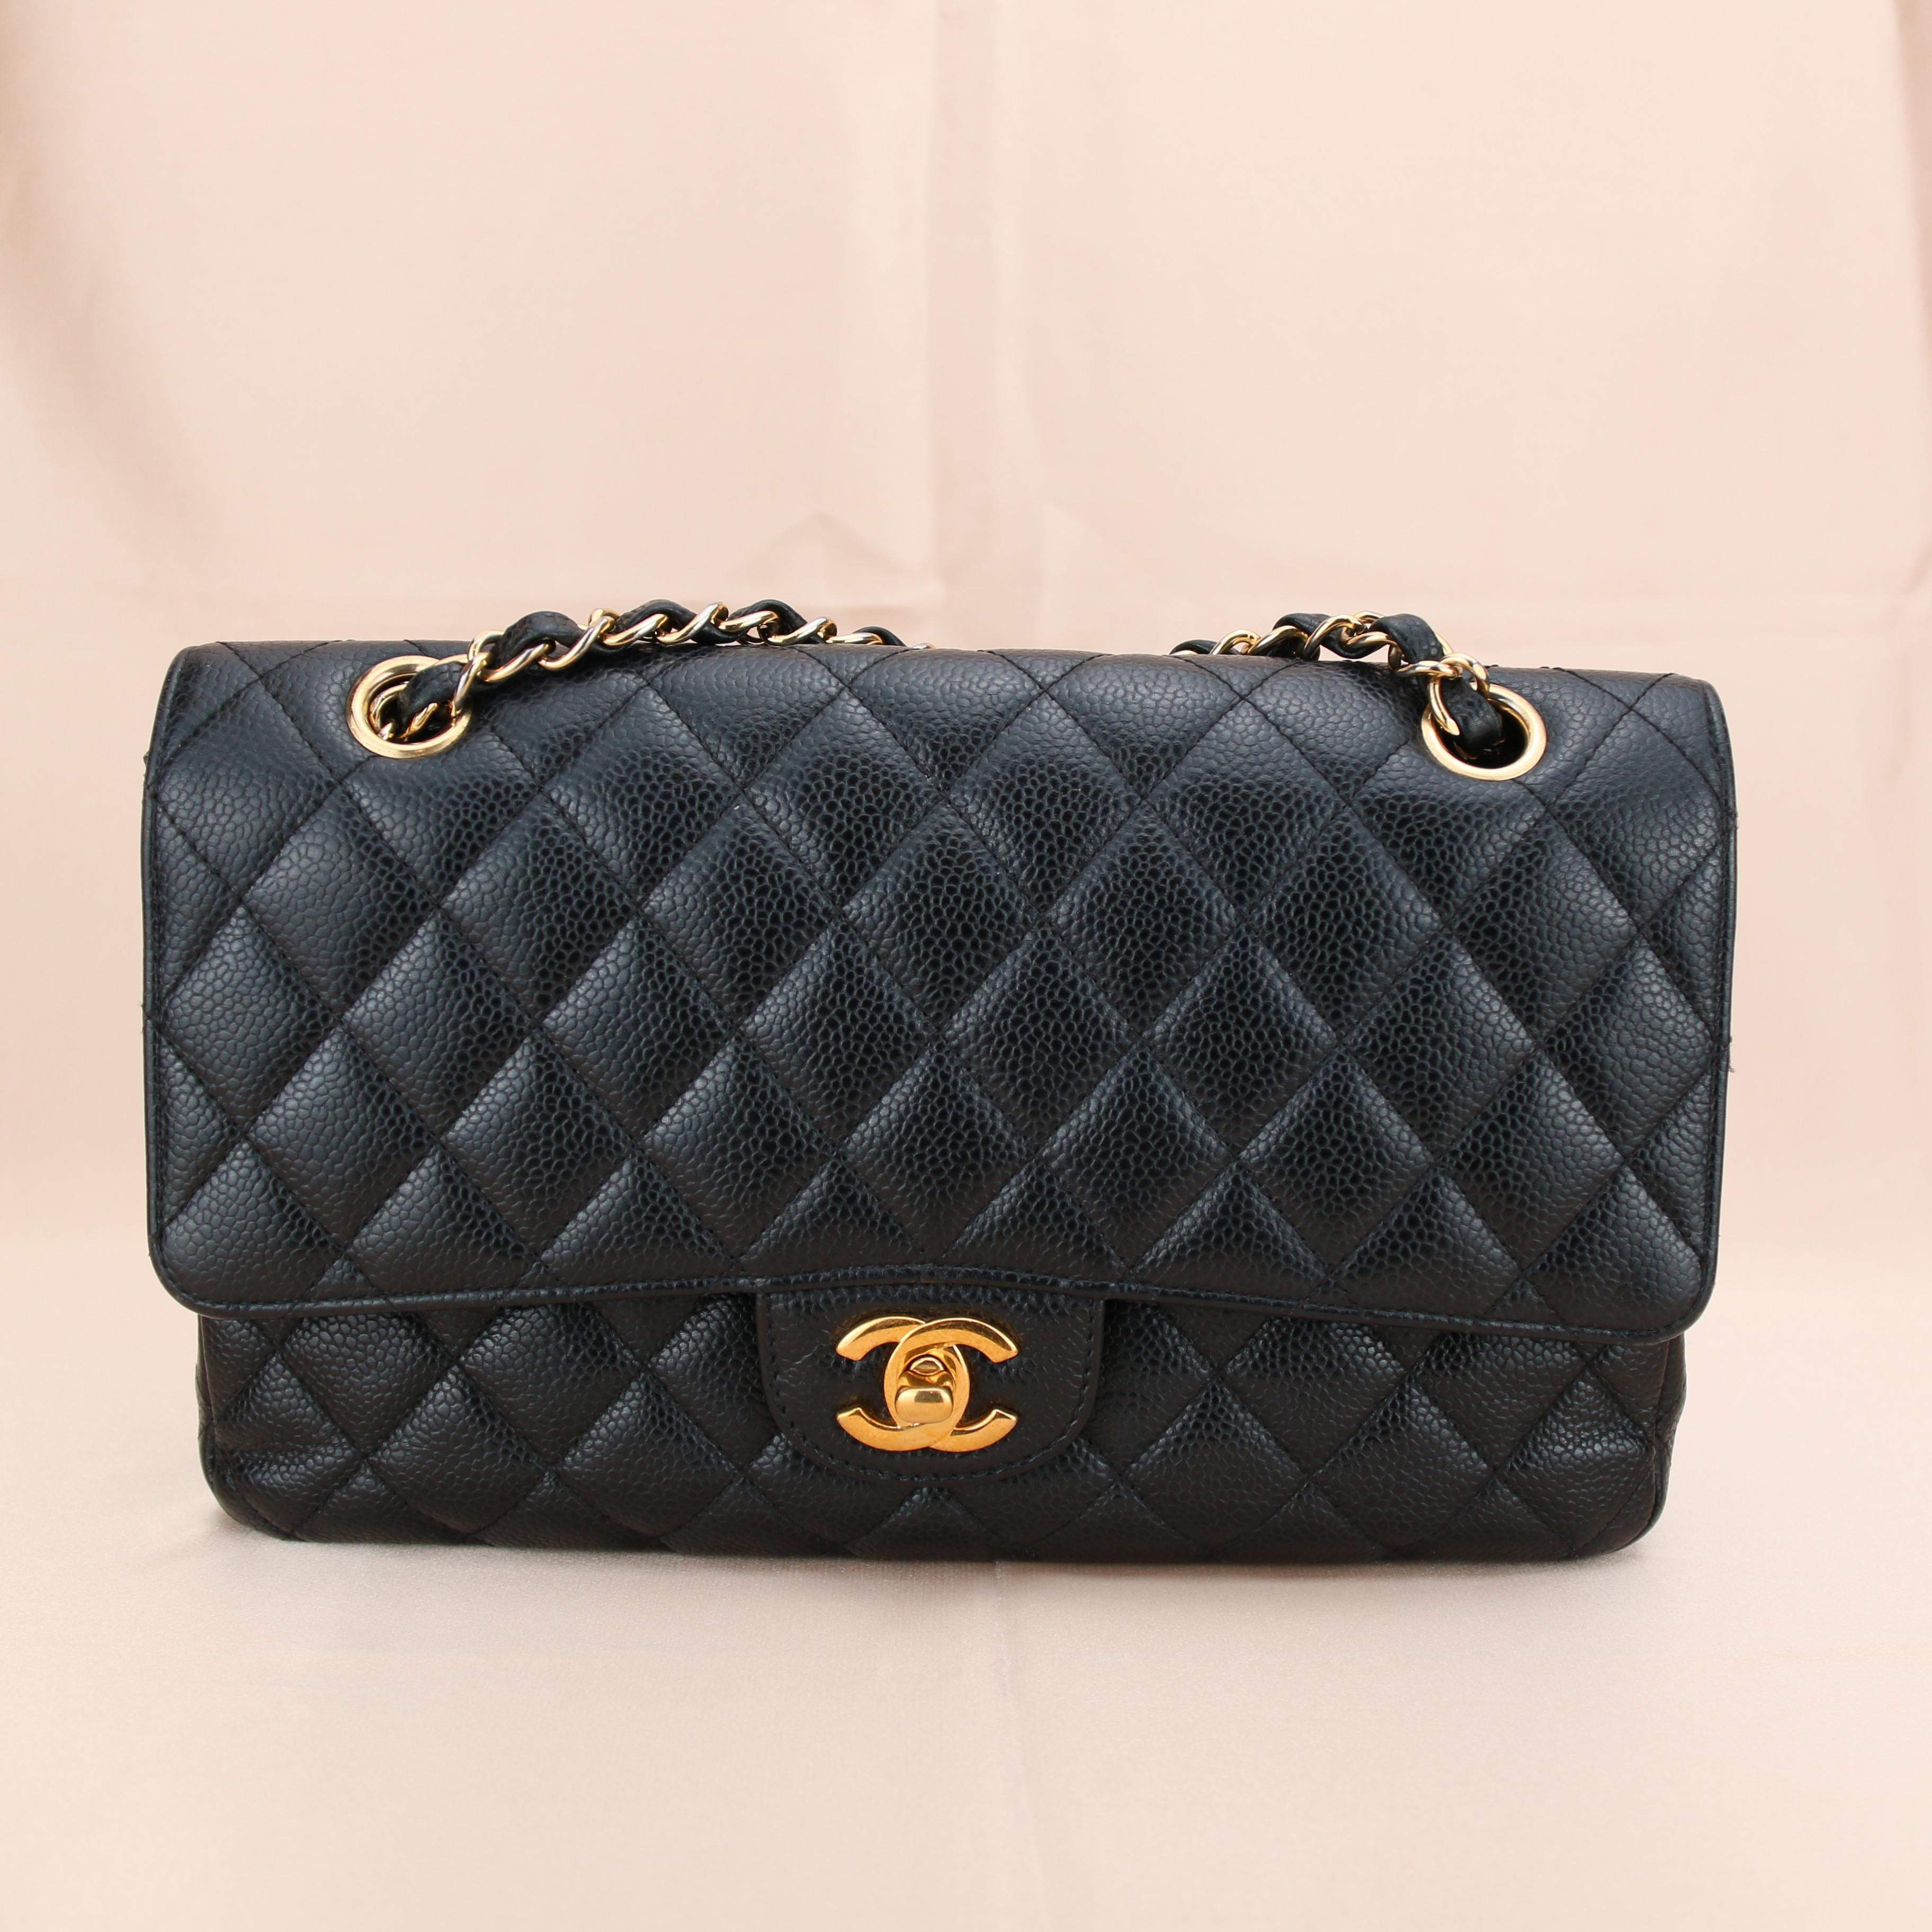 Dandelion Code	AT-1076
Brand	Chanel
Model	Timeless Classic Double Flap 
Serial No.	23******
Color	Black
Date	Approx. 2017
Metal	Gold
Material	Calfskin Caviar Leather
Measurements	Approx. 10in L x 2.8in W x 6in H
Condition	Excellent 
Comes